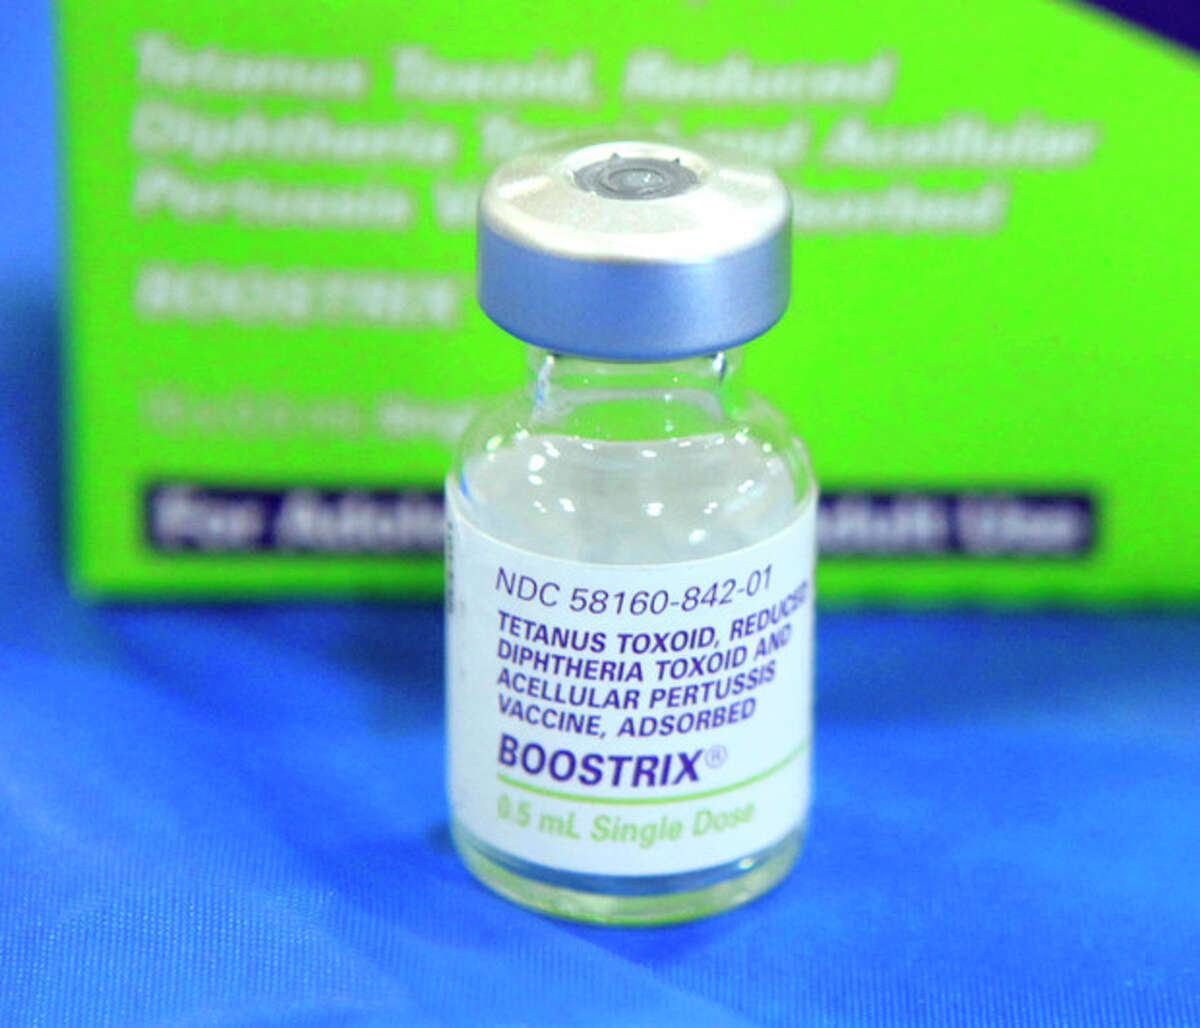 FILE - This Monday, Sept. 19, 2011 file photo shows an empty bottle of Tetanus, Diphthera and Pertussis, (whooping cough) vaccine at Inderkum High School in Sacramento, Calif. Health officials say the U.S. is on track to have the worst year for whooping cough in more than five decades. Nearly 18,000 cases have been reported so far - more than twice the number seen at this point last year, the Centers for Disease Control and Prevention said Thursday, July 19, 2012. At this pace, the number of whooping cough cases will surpass every year since 1959. (AP Photo/Rich Pedroncelli)